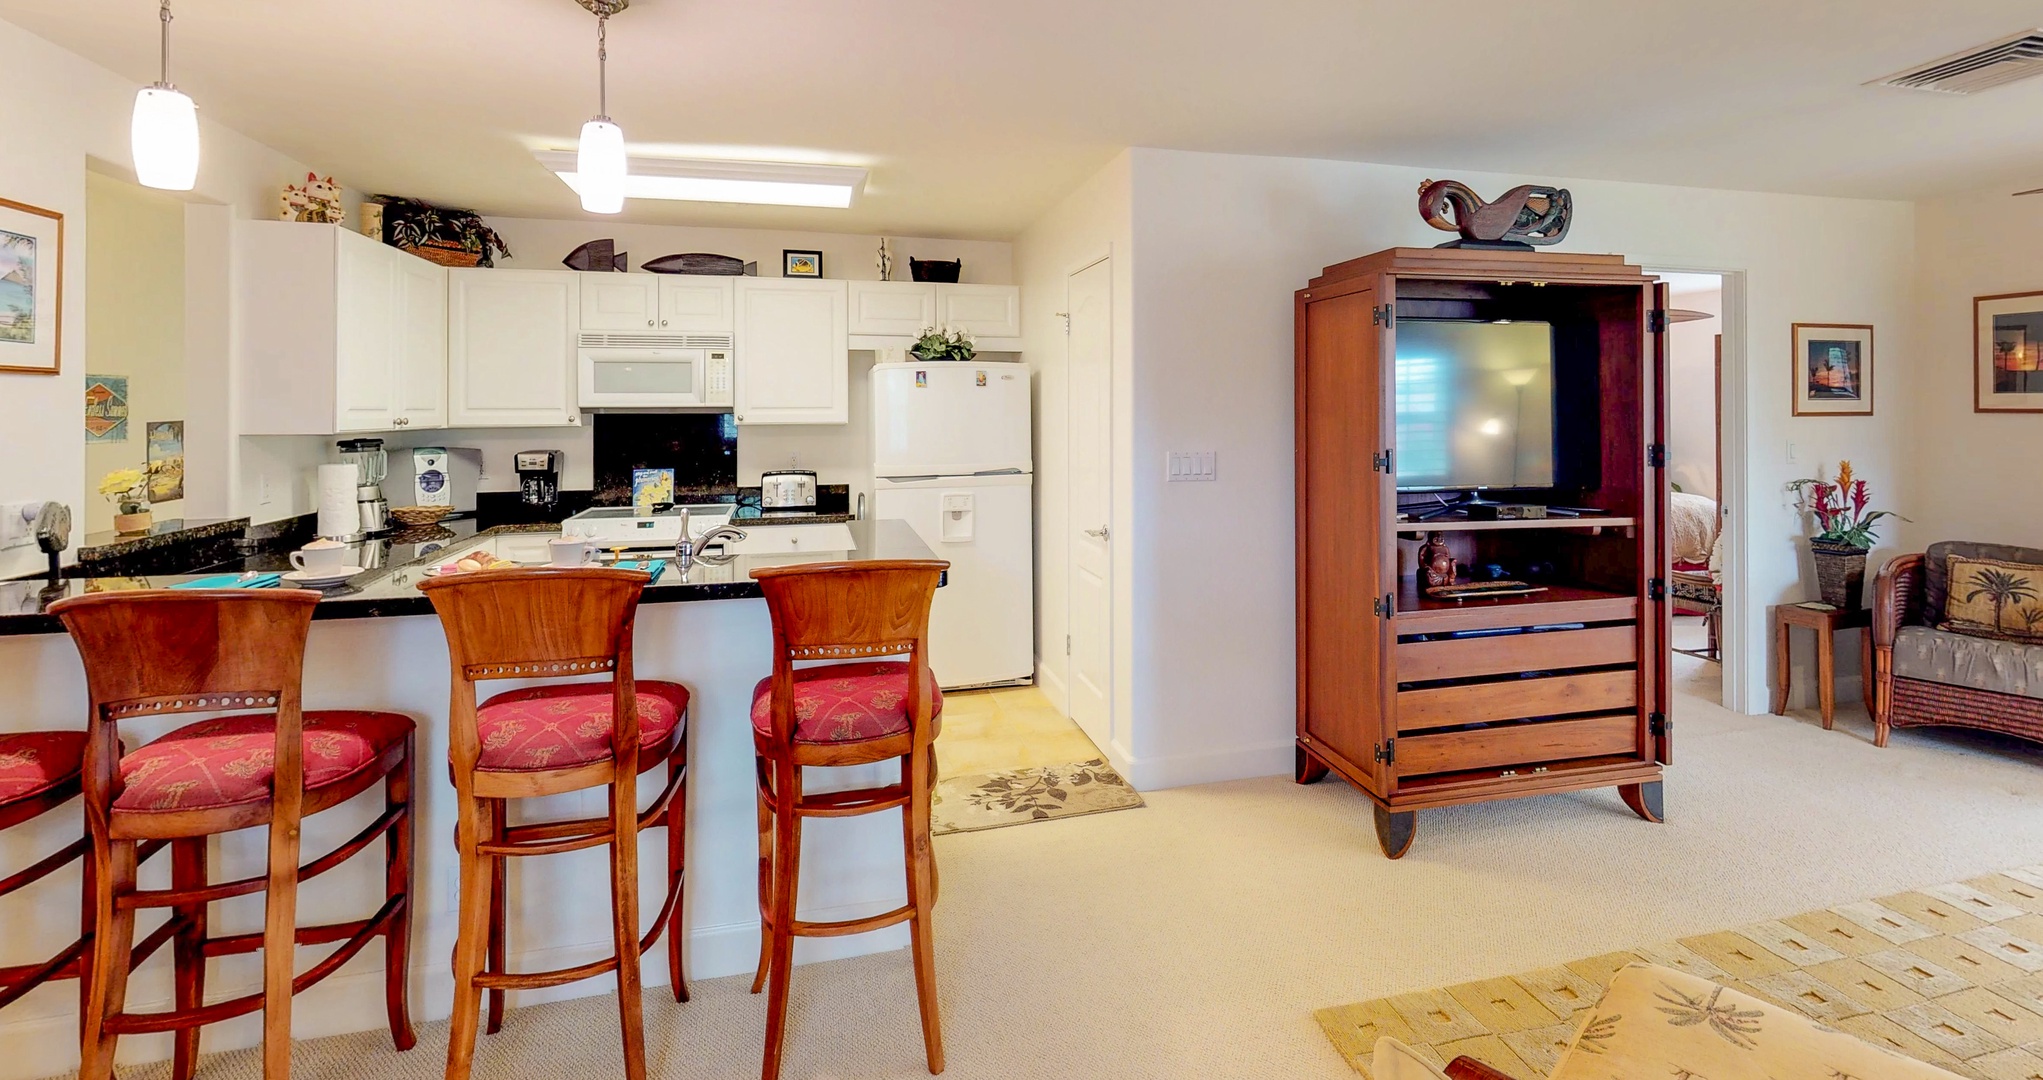 Kapolei Vacation Rentals, Ko Olina Kai 1105E - Fully-stocked kitchen with ample appliances to cater your culinary needs.